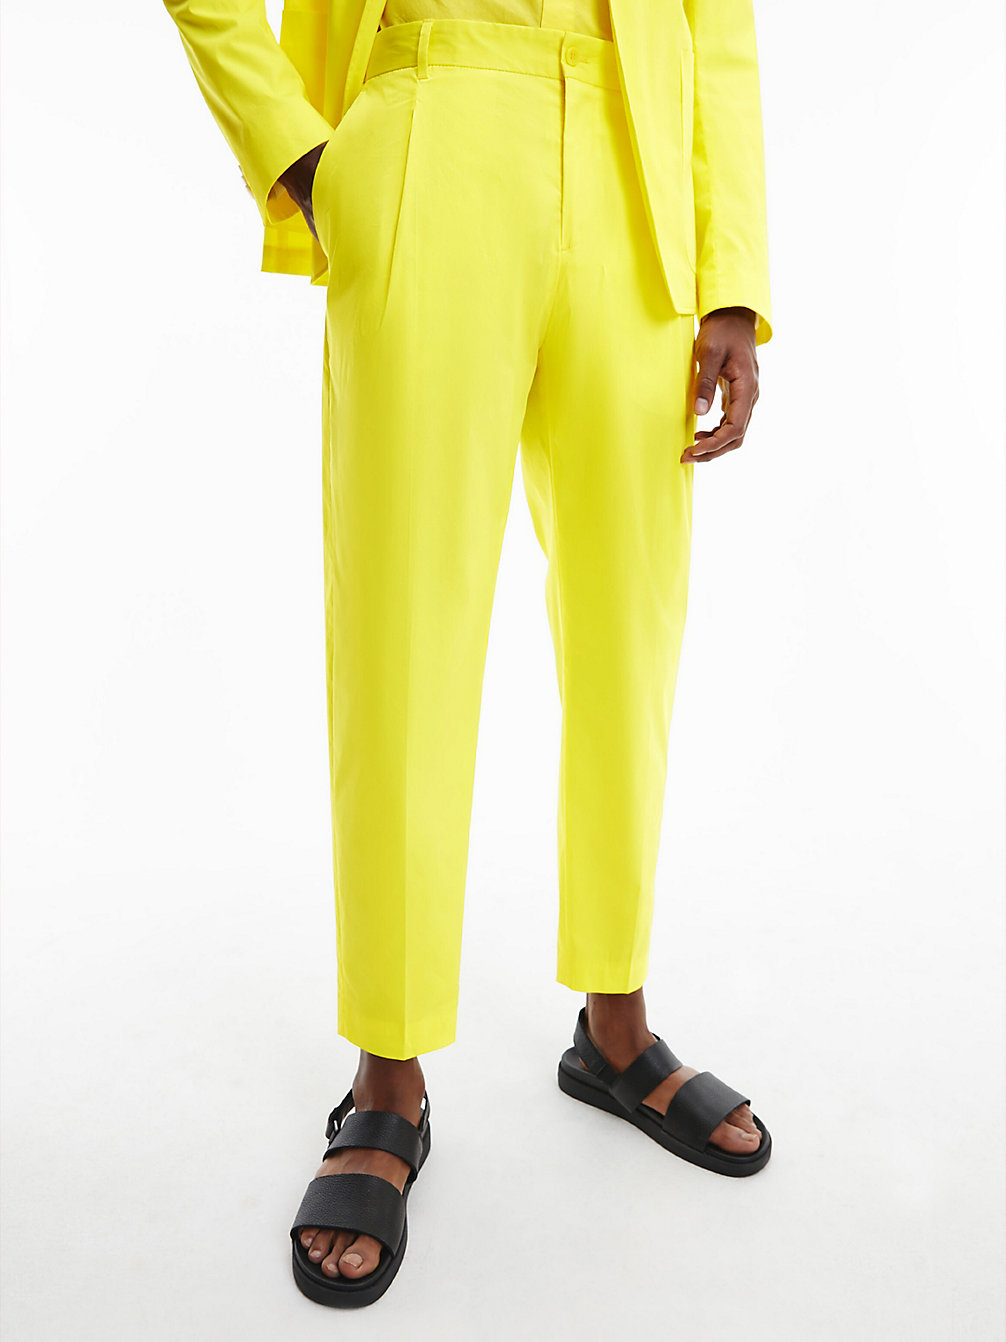 MAGNETIC YELLOW Relaxed Cotton Stretch Trousers undefined men Calvin Klein